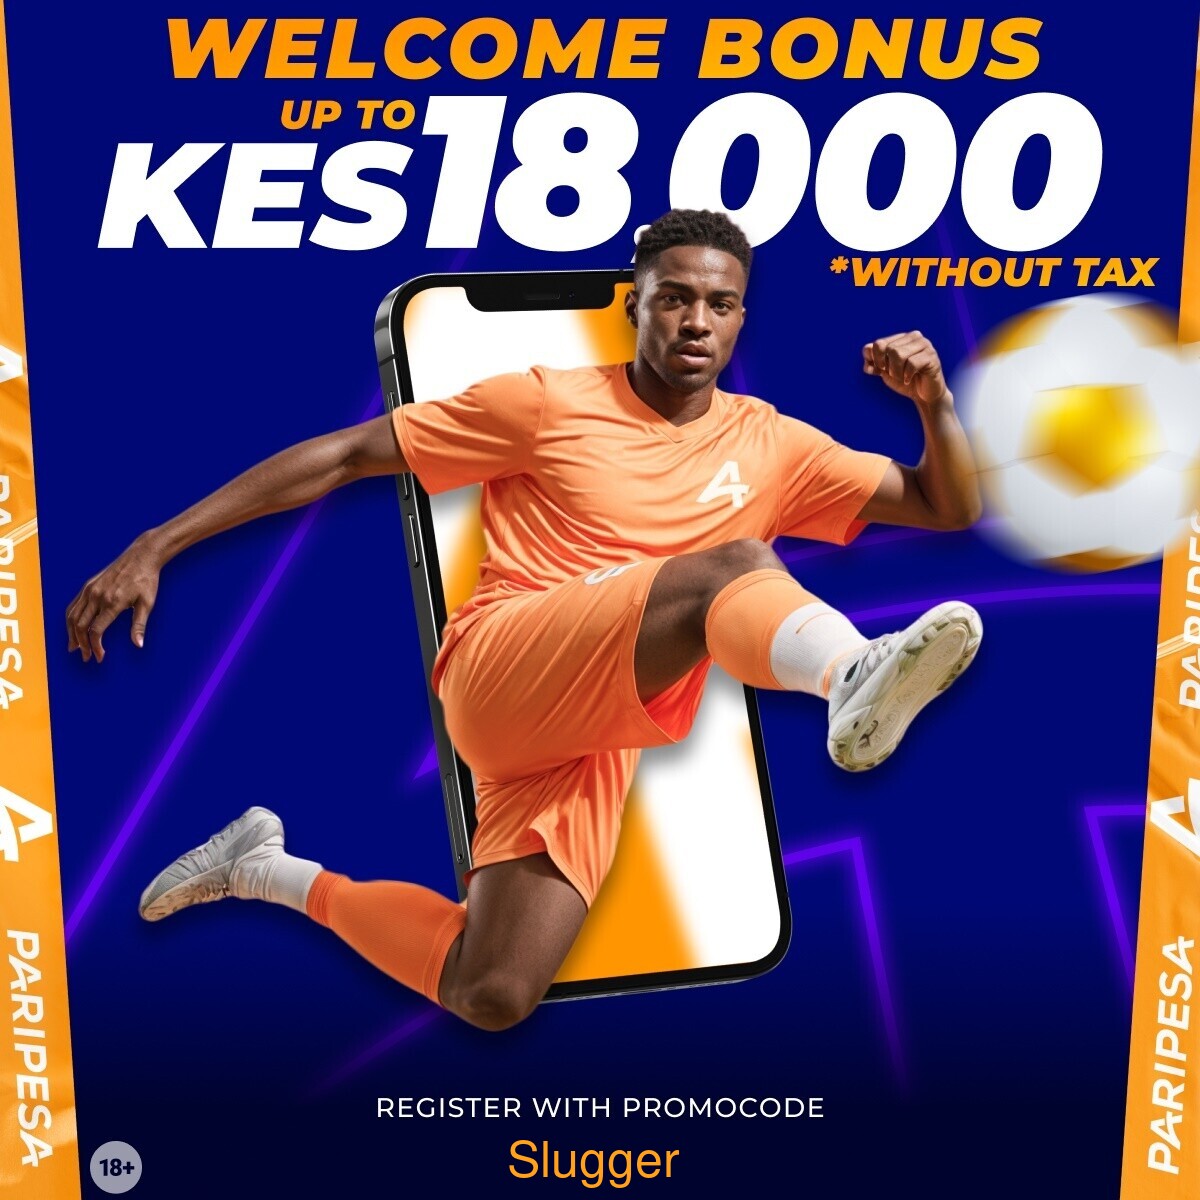 Boost Your Winnings with Paripesa! Welcome Bonus200% Don't miss out! Register Now via cutt.ly/beqomUrX with Promo Code: Slugger Join Paripesa and double your first deposit to increase your chances of winning big! Place Your Bets Now Shiko Manchester United De Zerbi